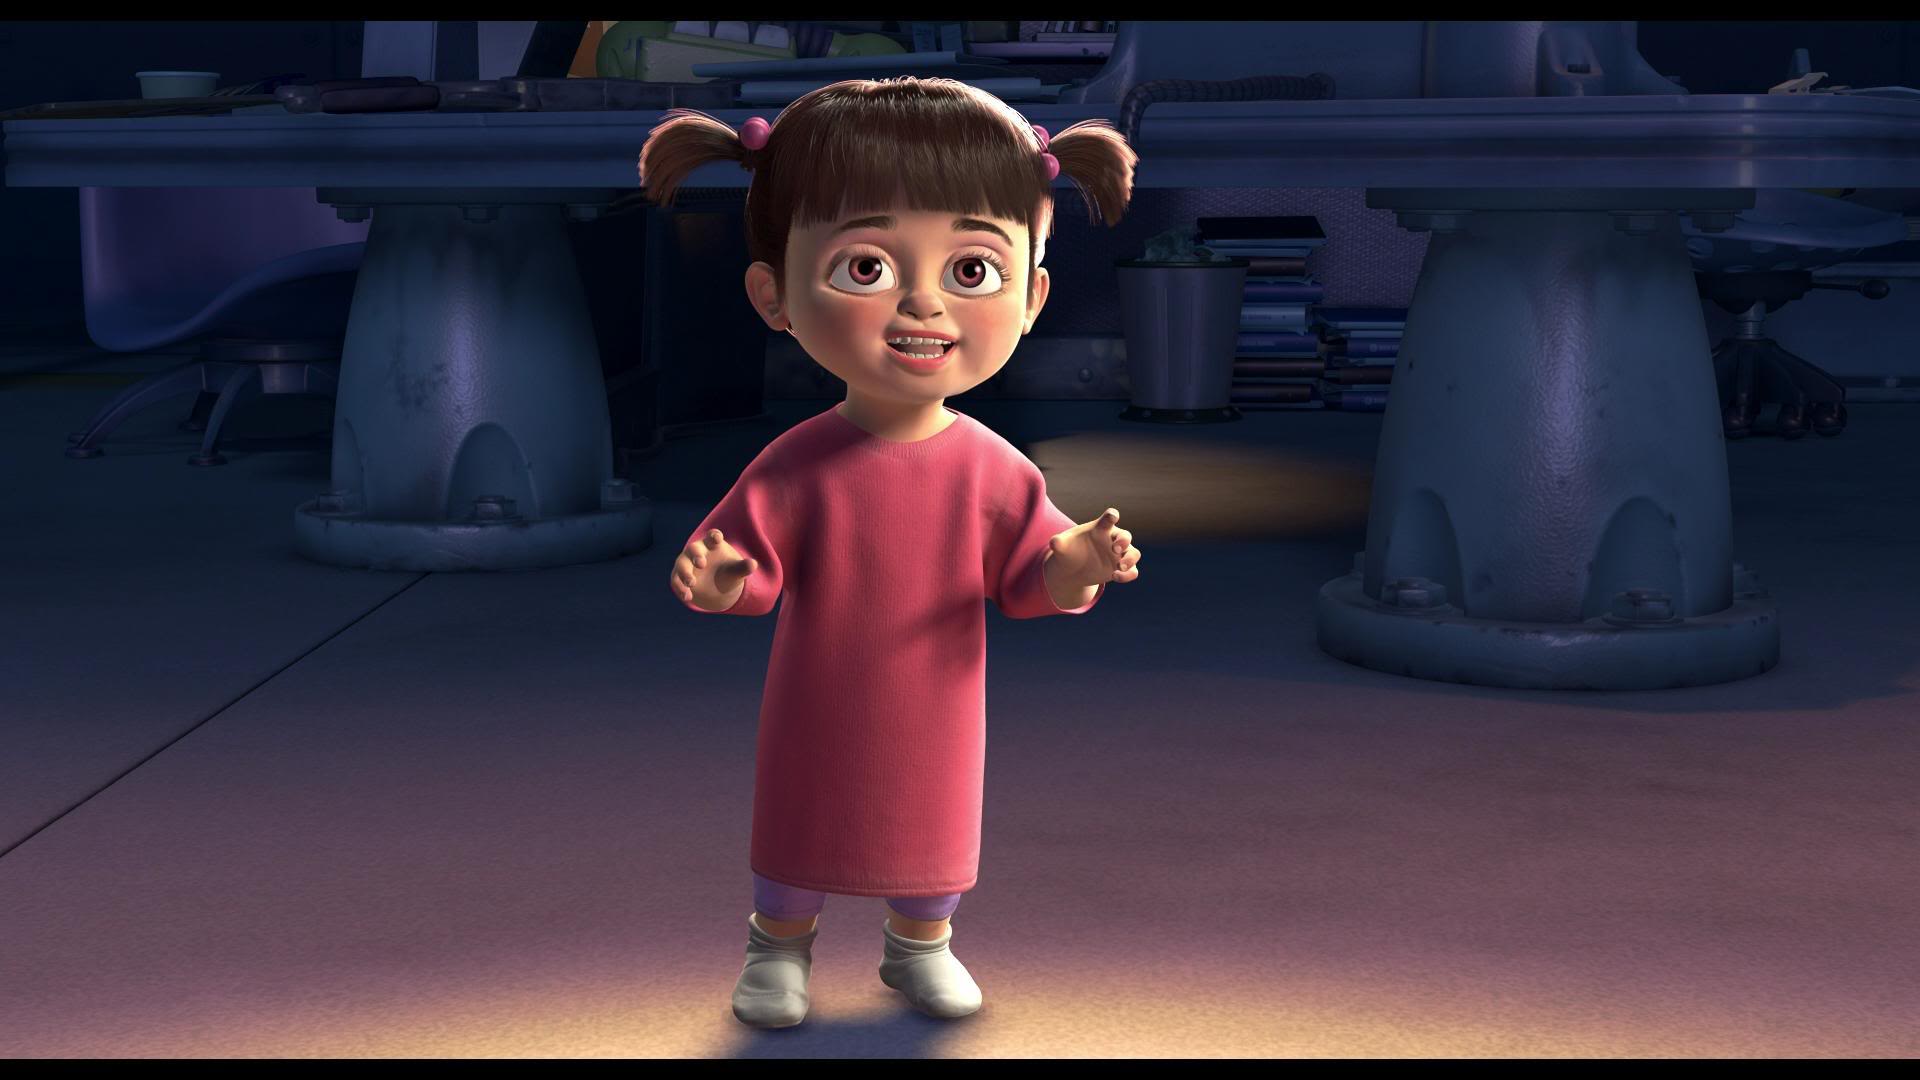 Boo Monsters Inc. Logo - Is a movie about Boo from Monsters, Inc. actually happening